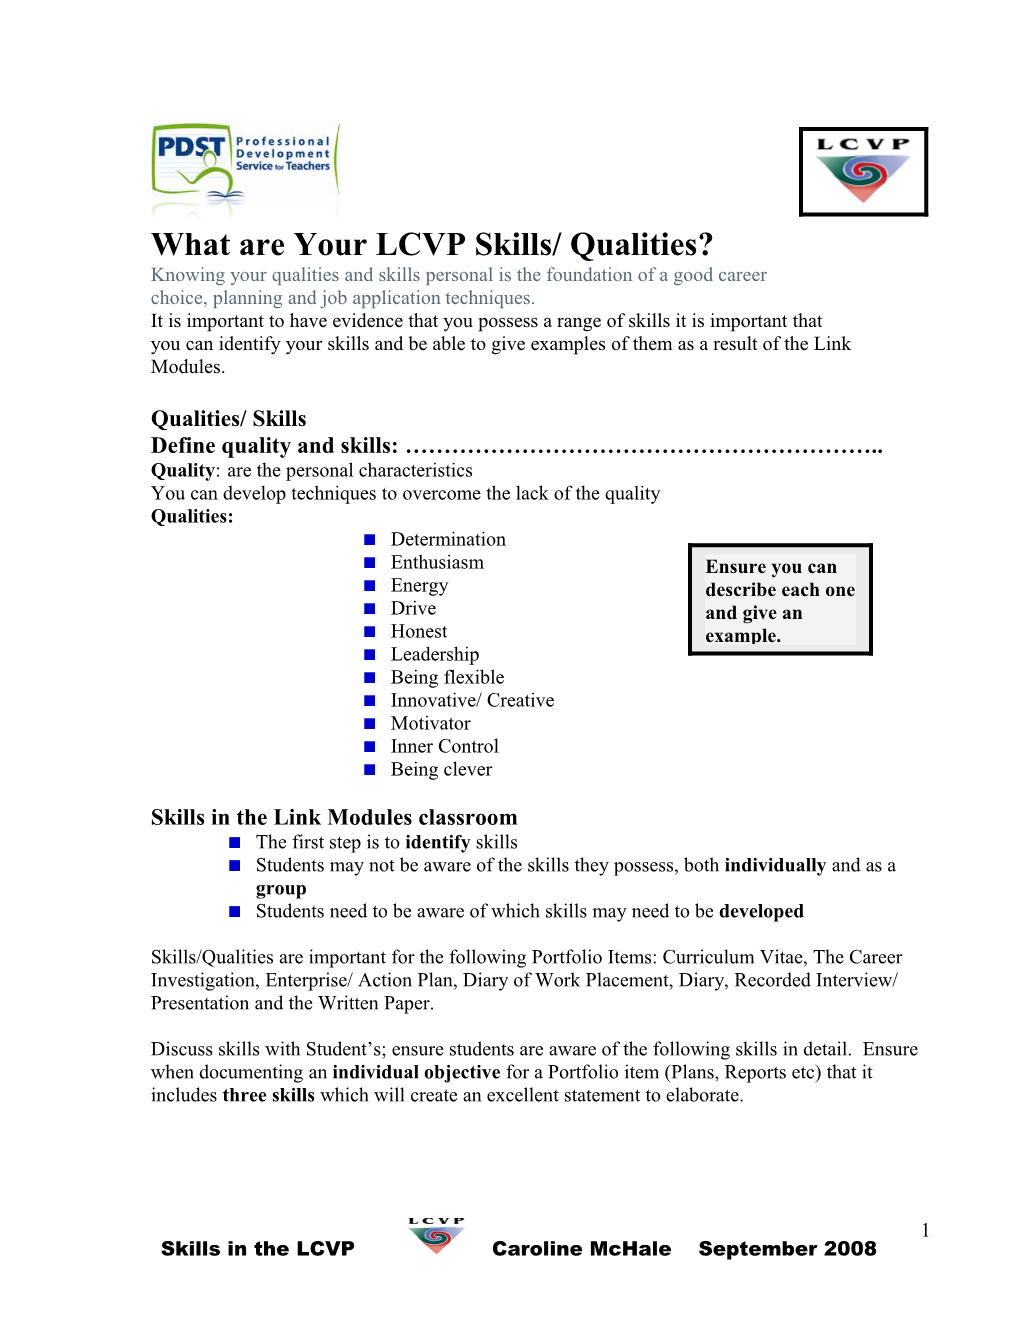 Skills in the Link Modules Classroom